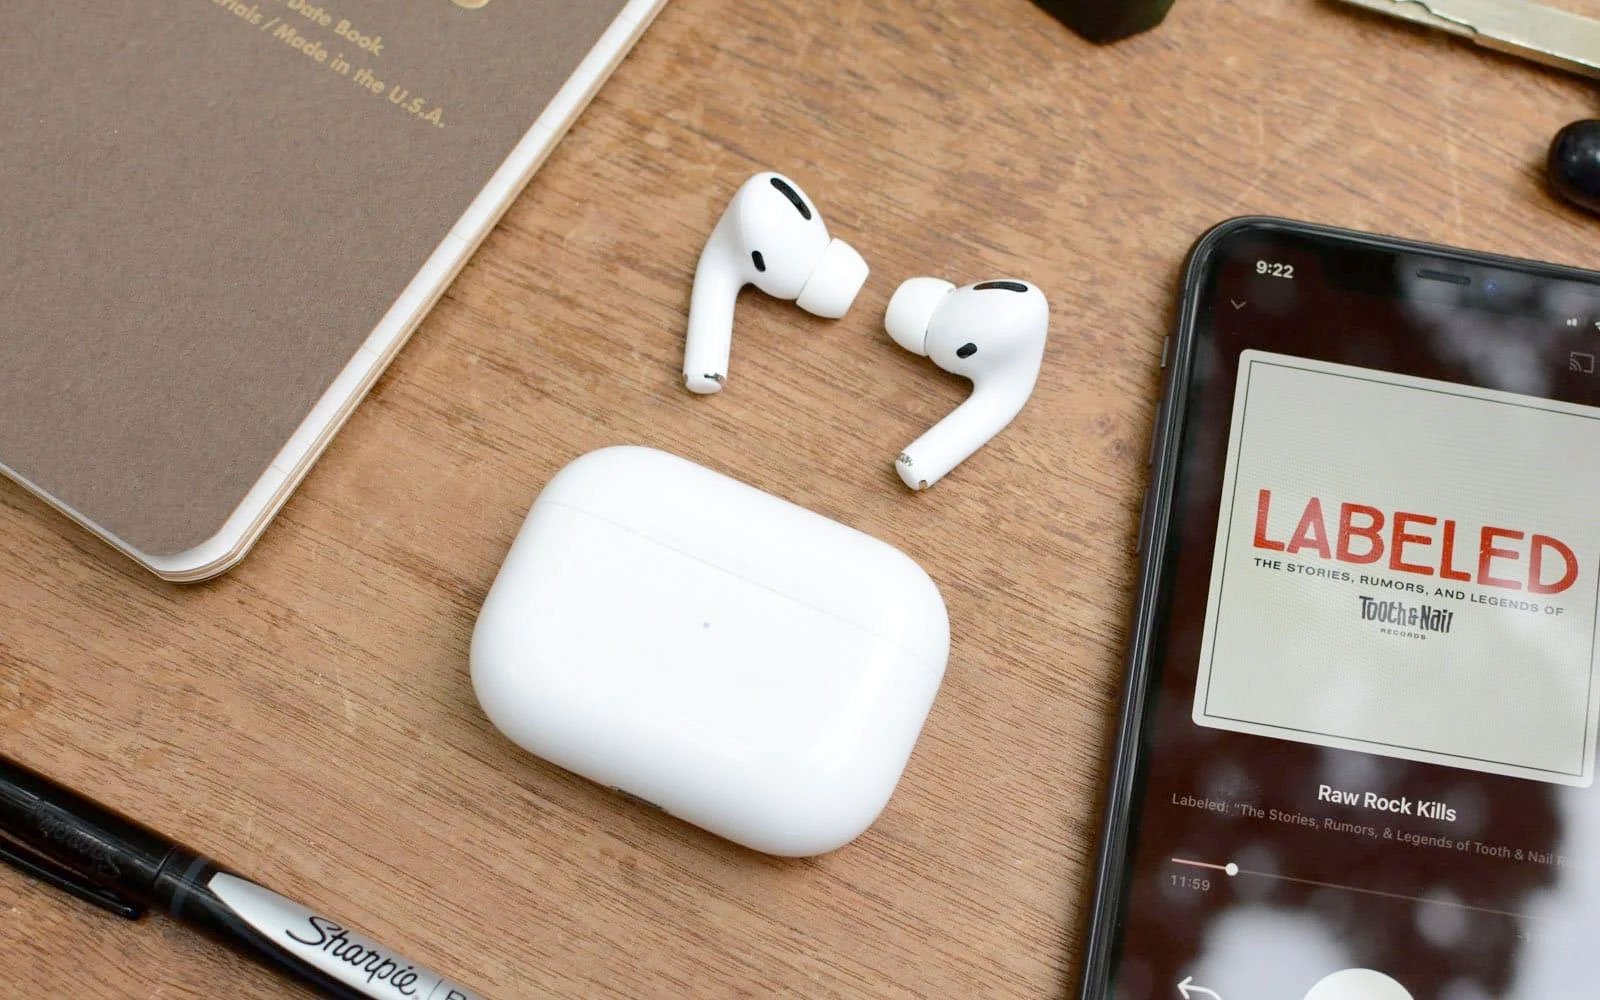 Apple's new features for AirPods include help for 'mild' hearing loss